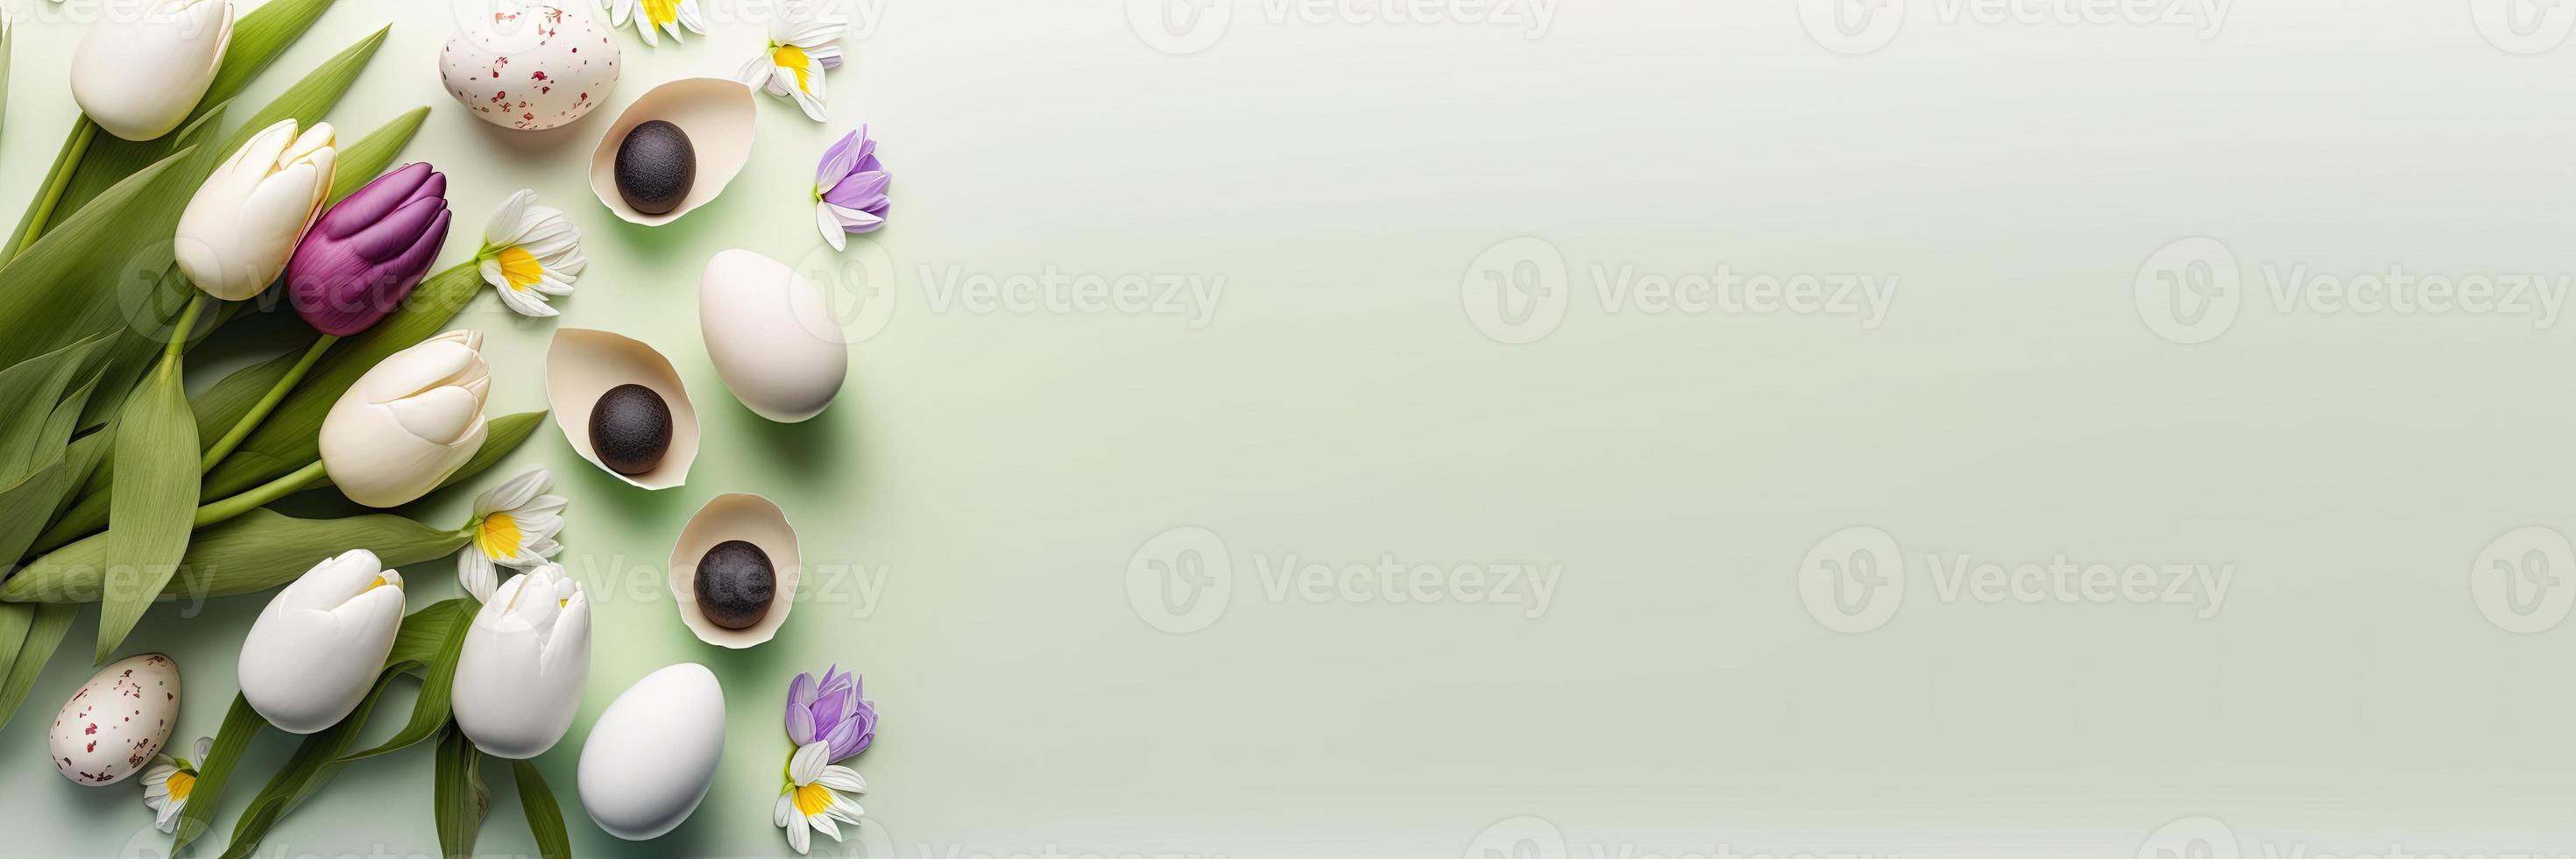 Decorated Tulips and Eggs On a Clean Background for An Easter Banner photo